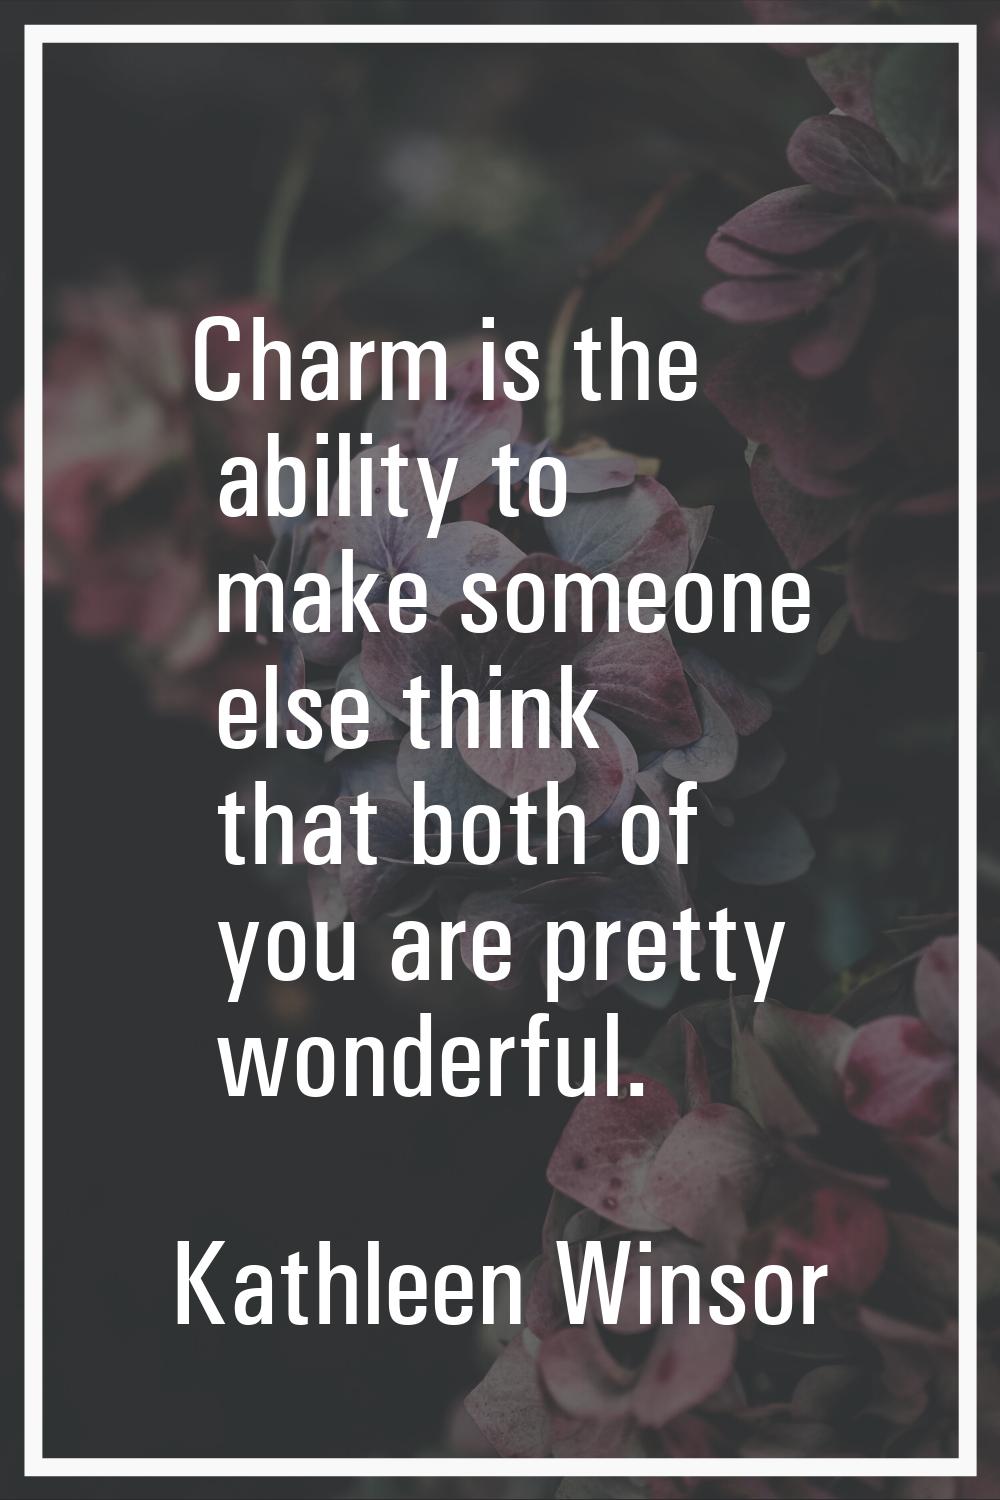 Charm is the ability to make someone else think that both of you are pretty wonderful.